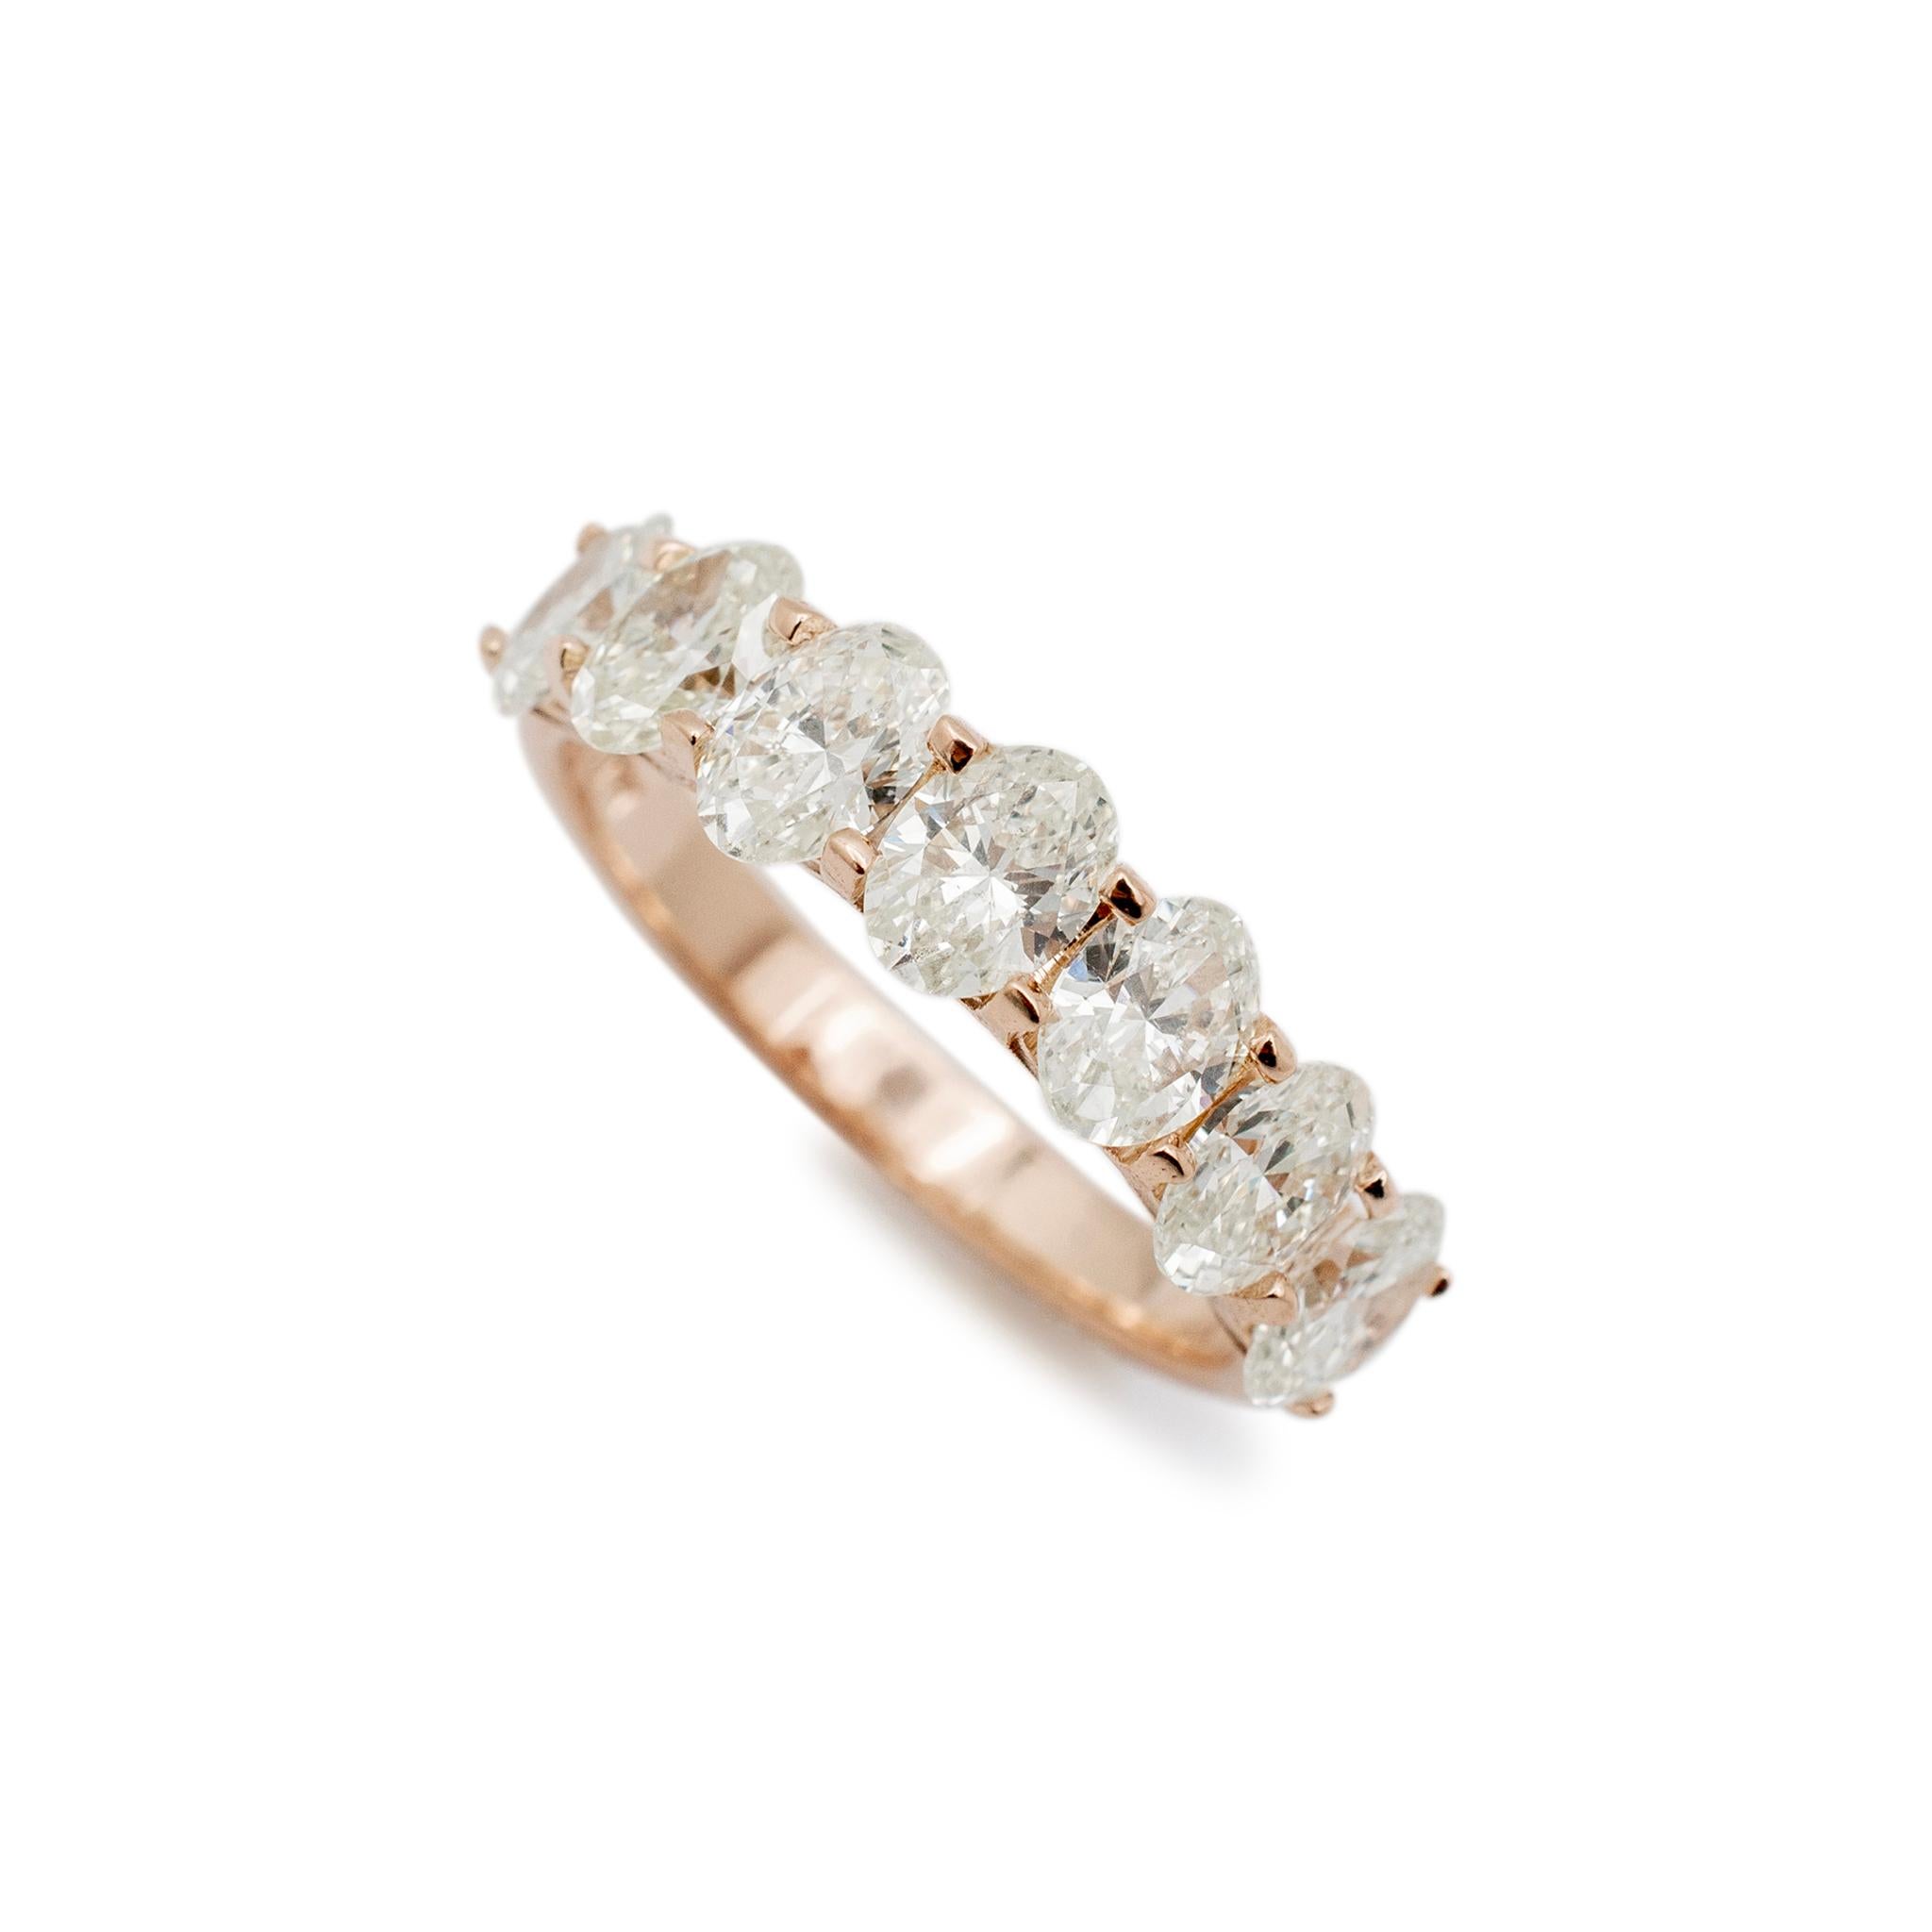 Gender: Ladies

Metal Type: 14K Rose Gold

Size: 7

Shank Maximum Width: 2.70 mm

Weight: 3.20 Grams

Ladies 14K rose gold seven-across diamond semi-eternity band with a half-round shank. The metal was tested and determined to be 14K rose gold.